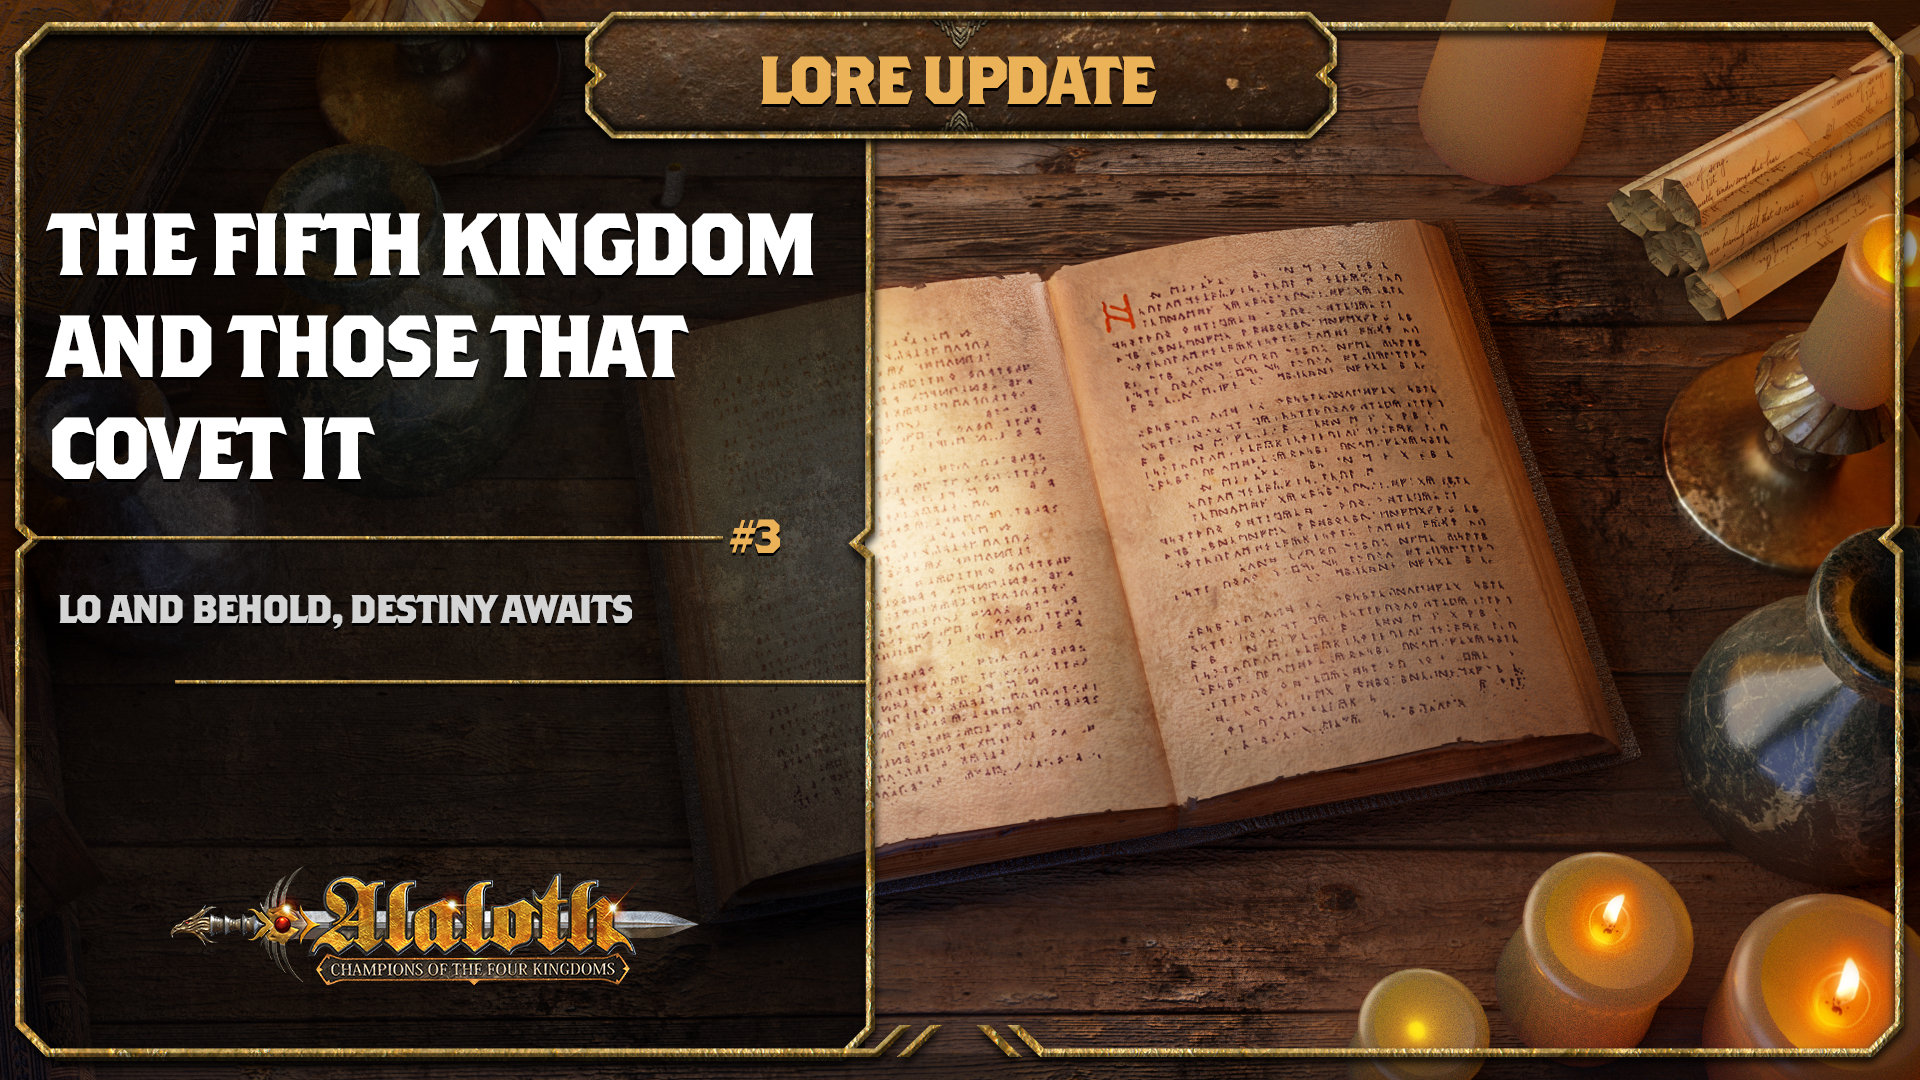 Alaloth - Champions of The Four Kingdoms - Lore Update #3